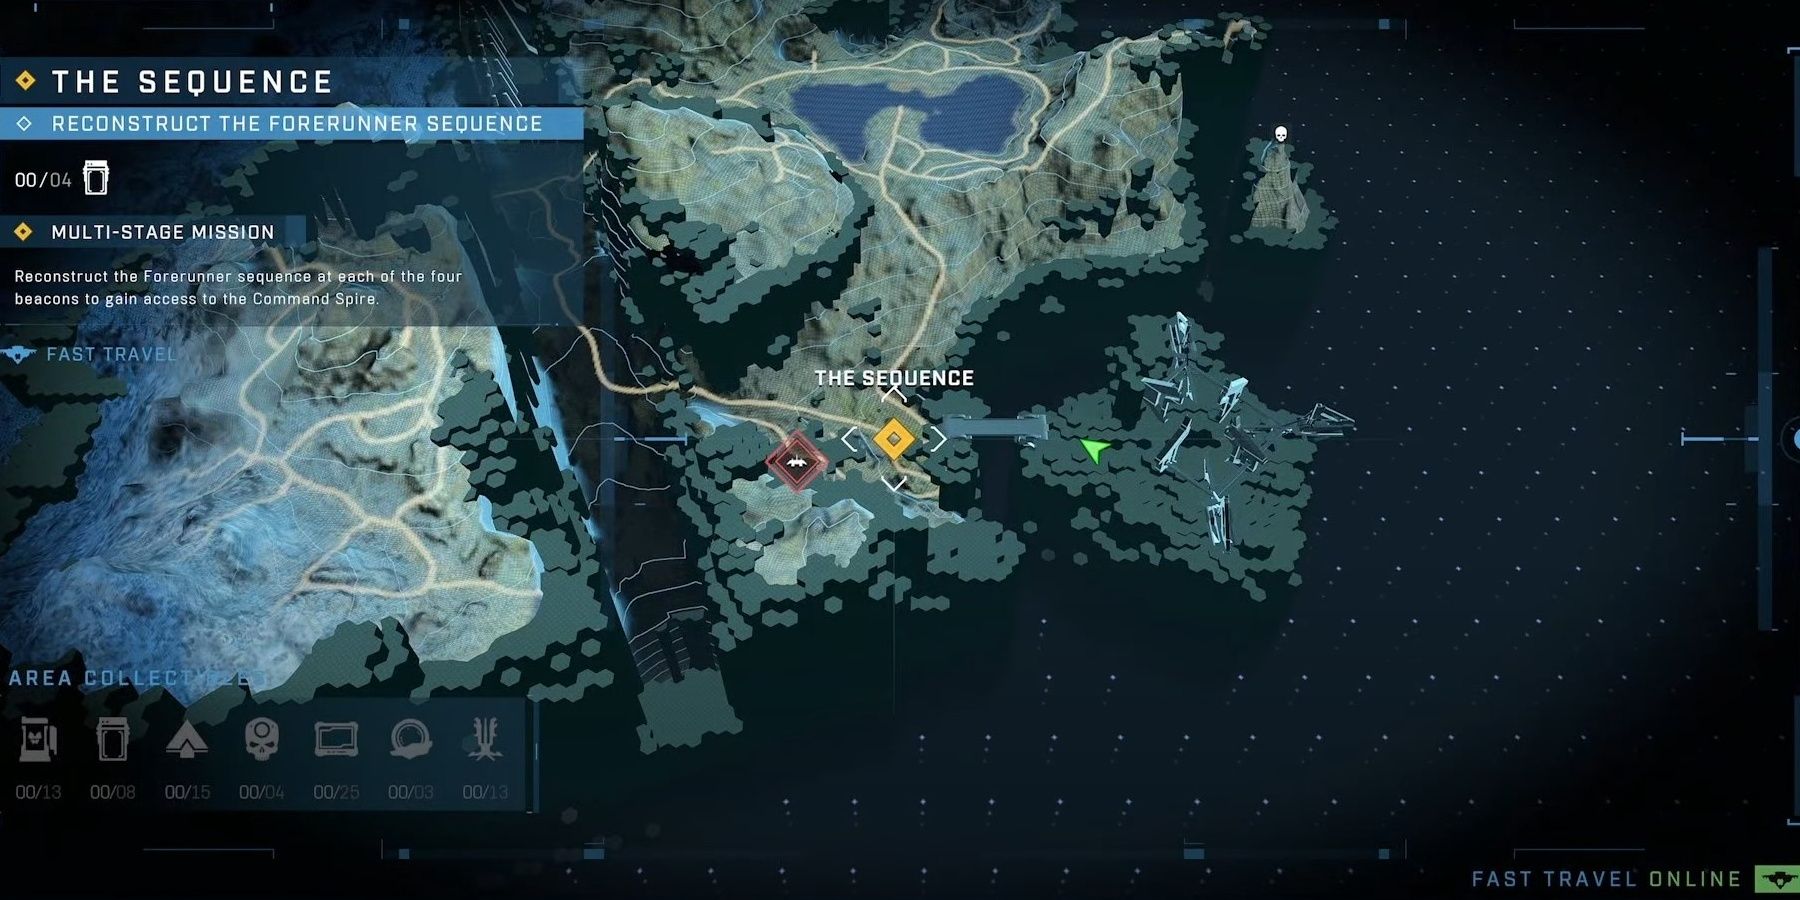 The map in Halo Infinite depicts the sequence mission.